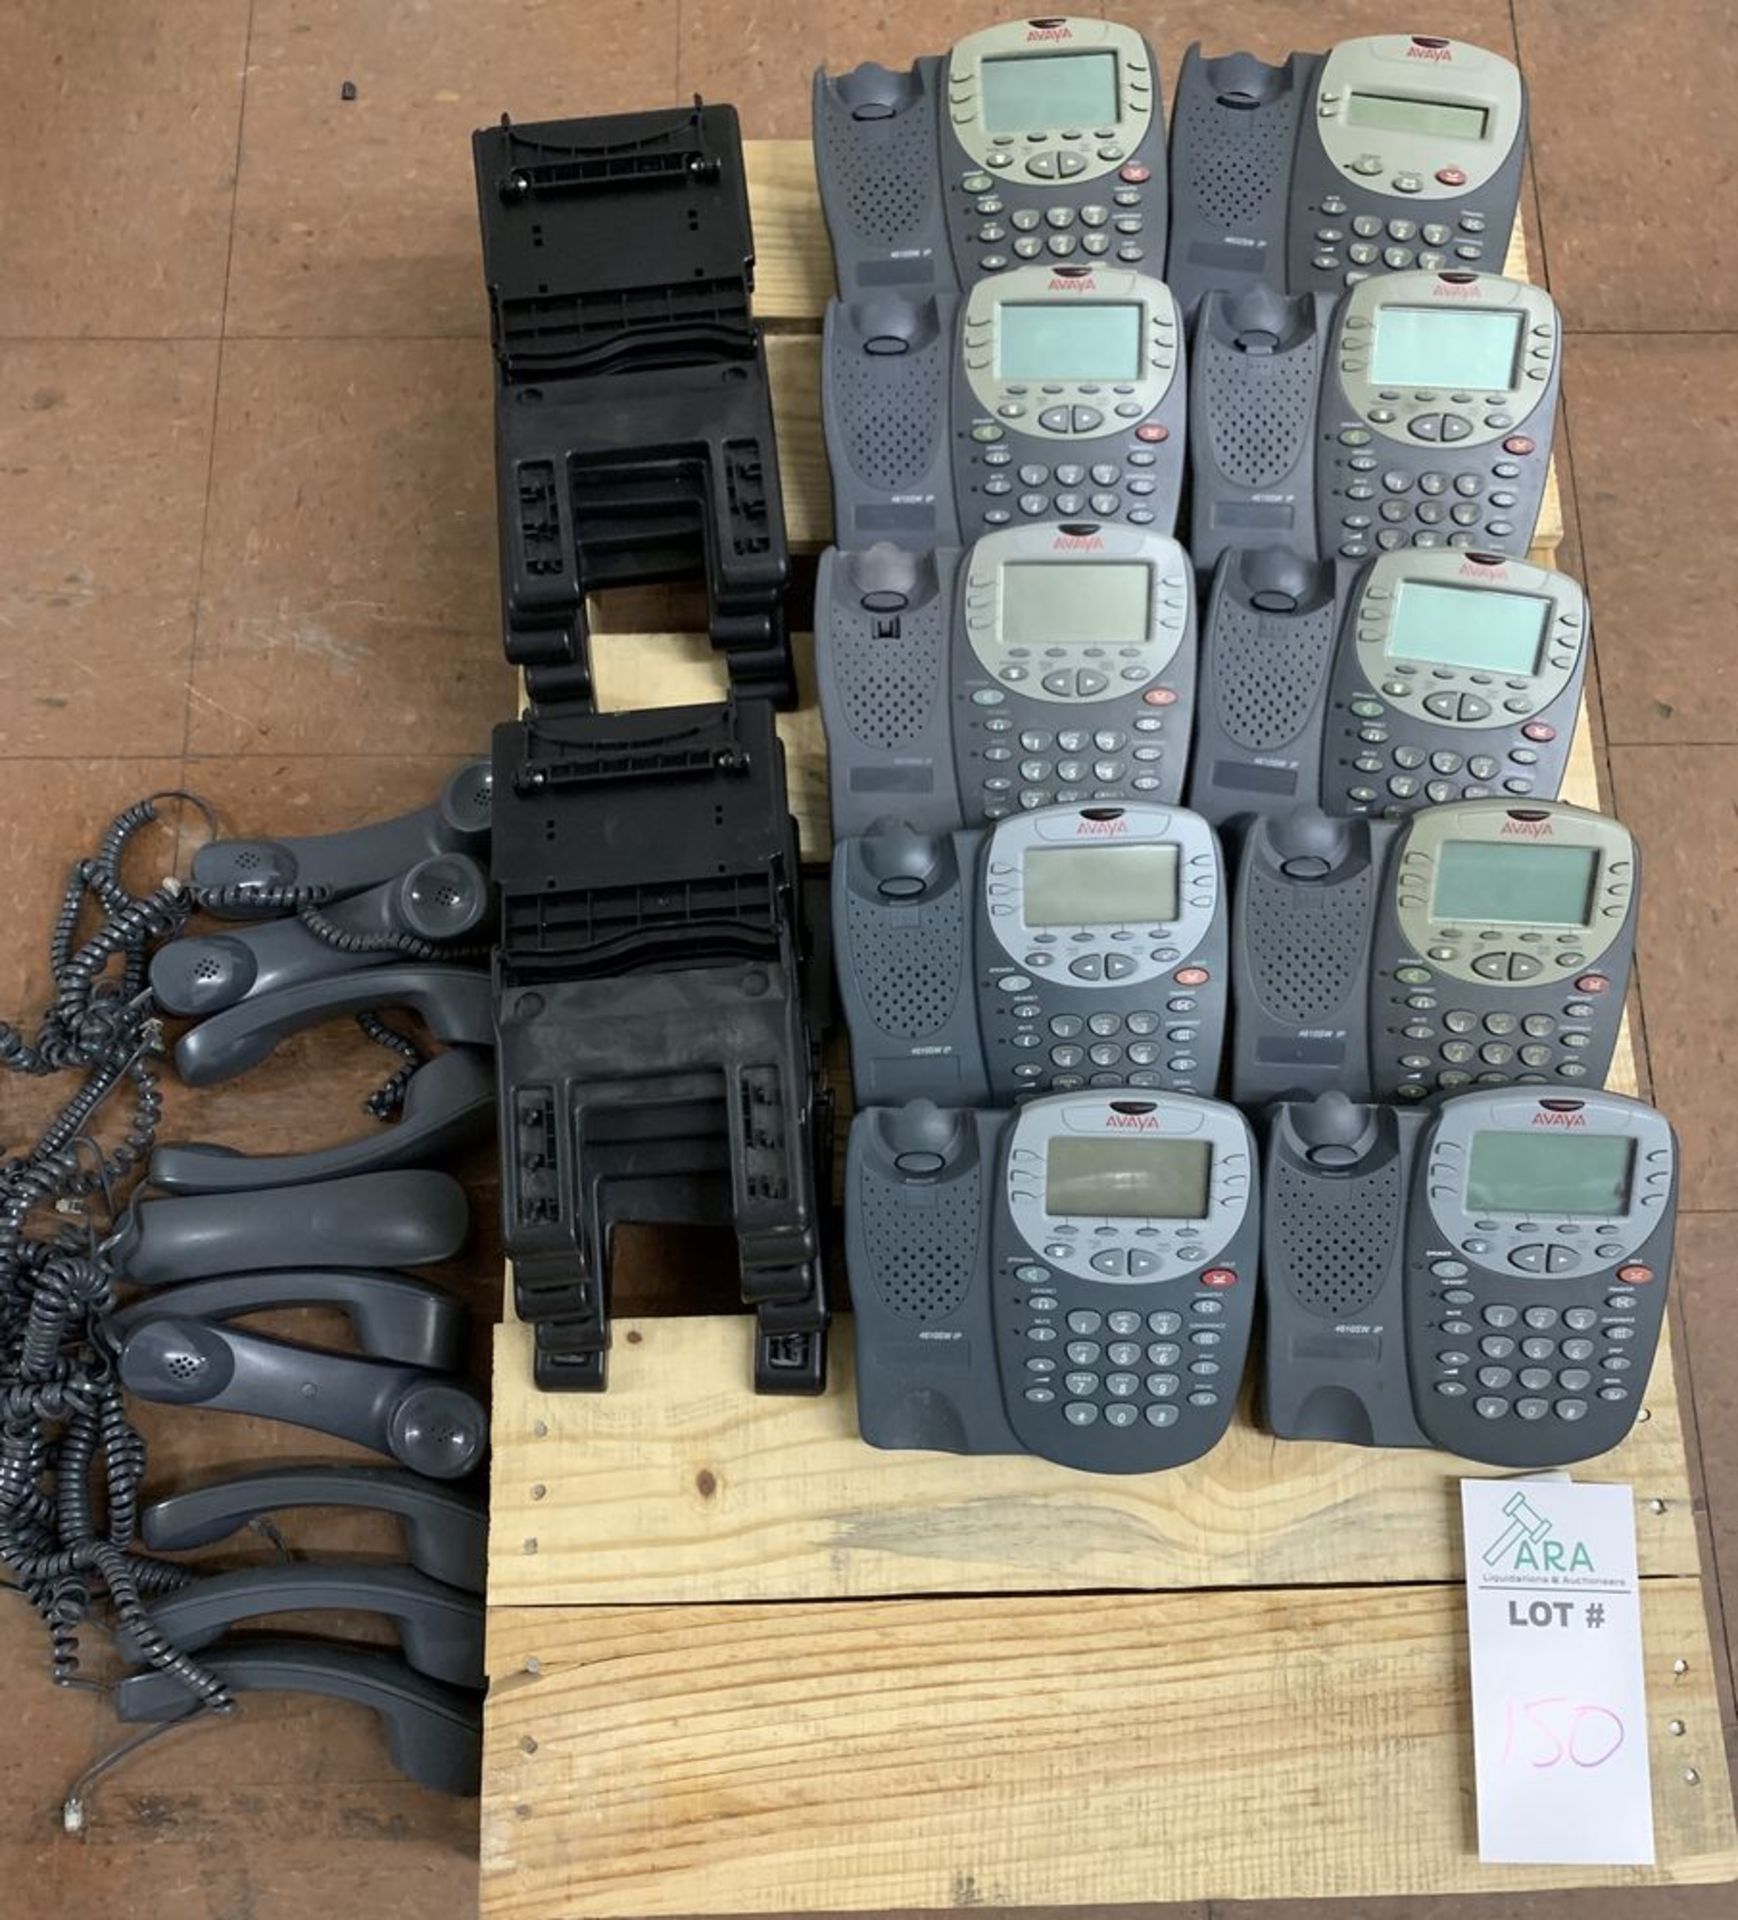 10 AVAYA PHONE HANDSETS: 9x MODEL 4610SW IP and 1x 4602 SW IPALL ITEMS ARE SOLD AS IS UNTESTED BUT - Image 2 of 4